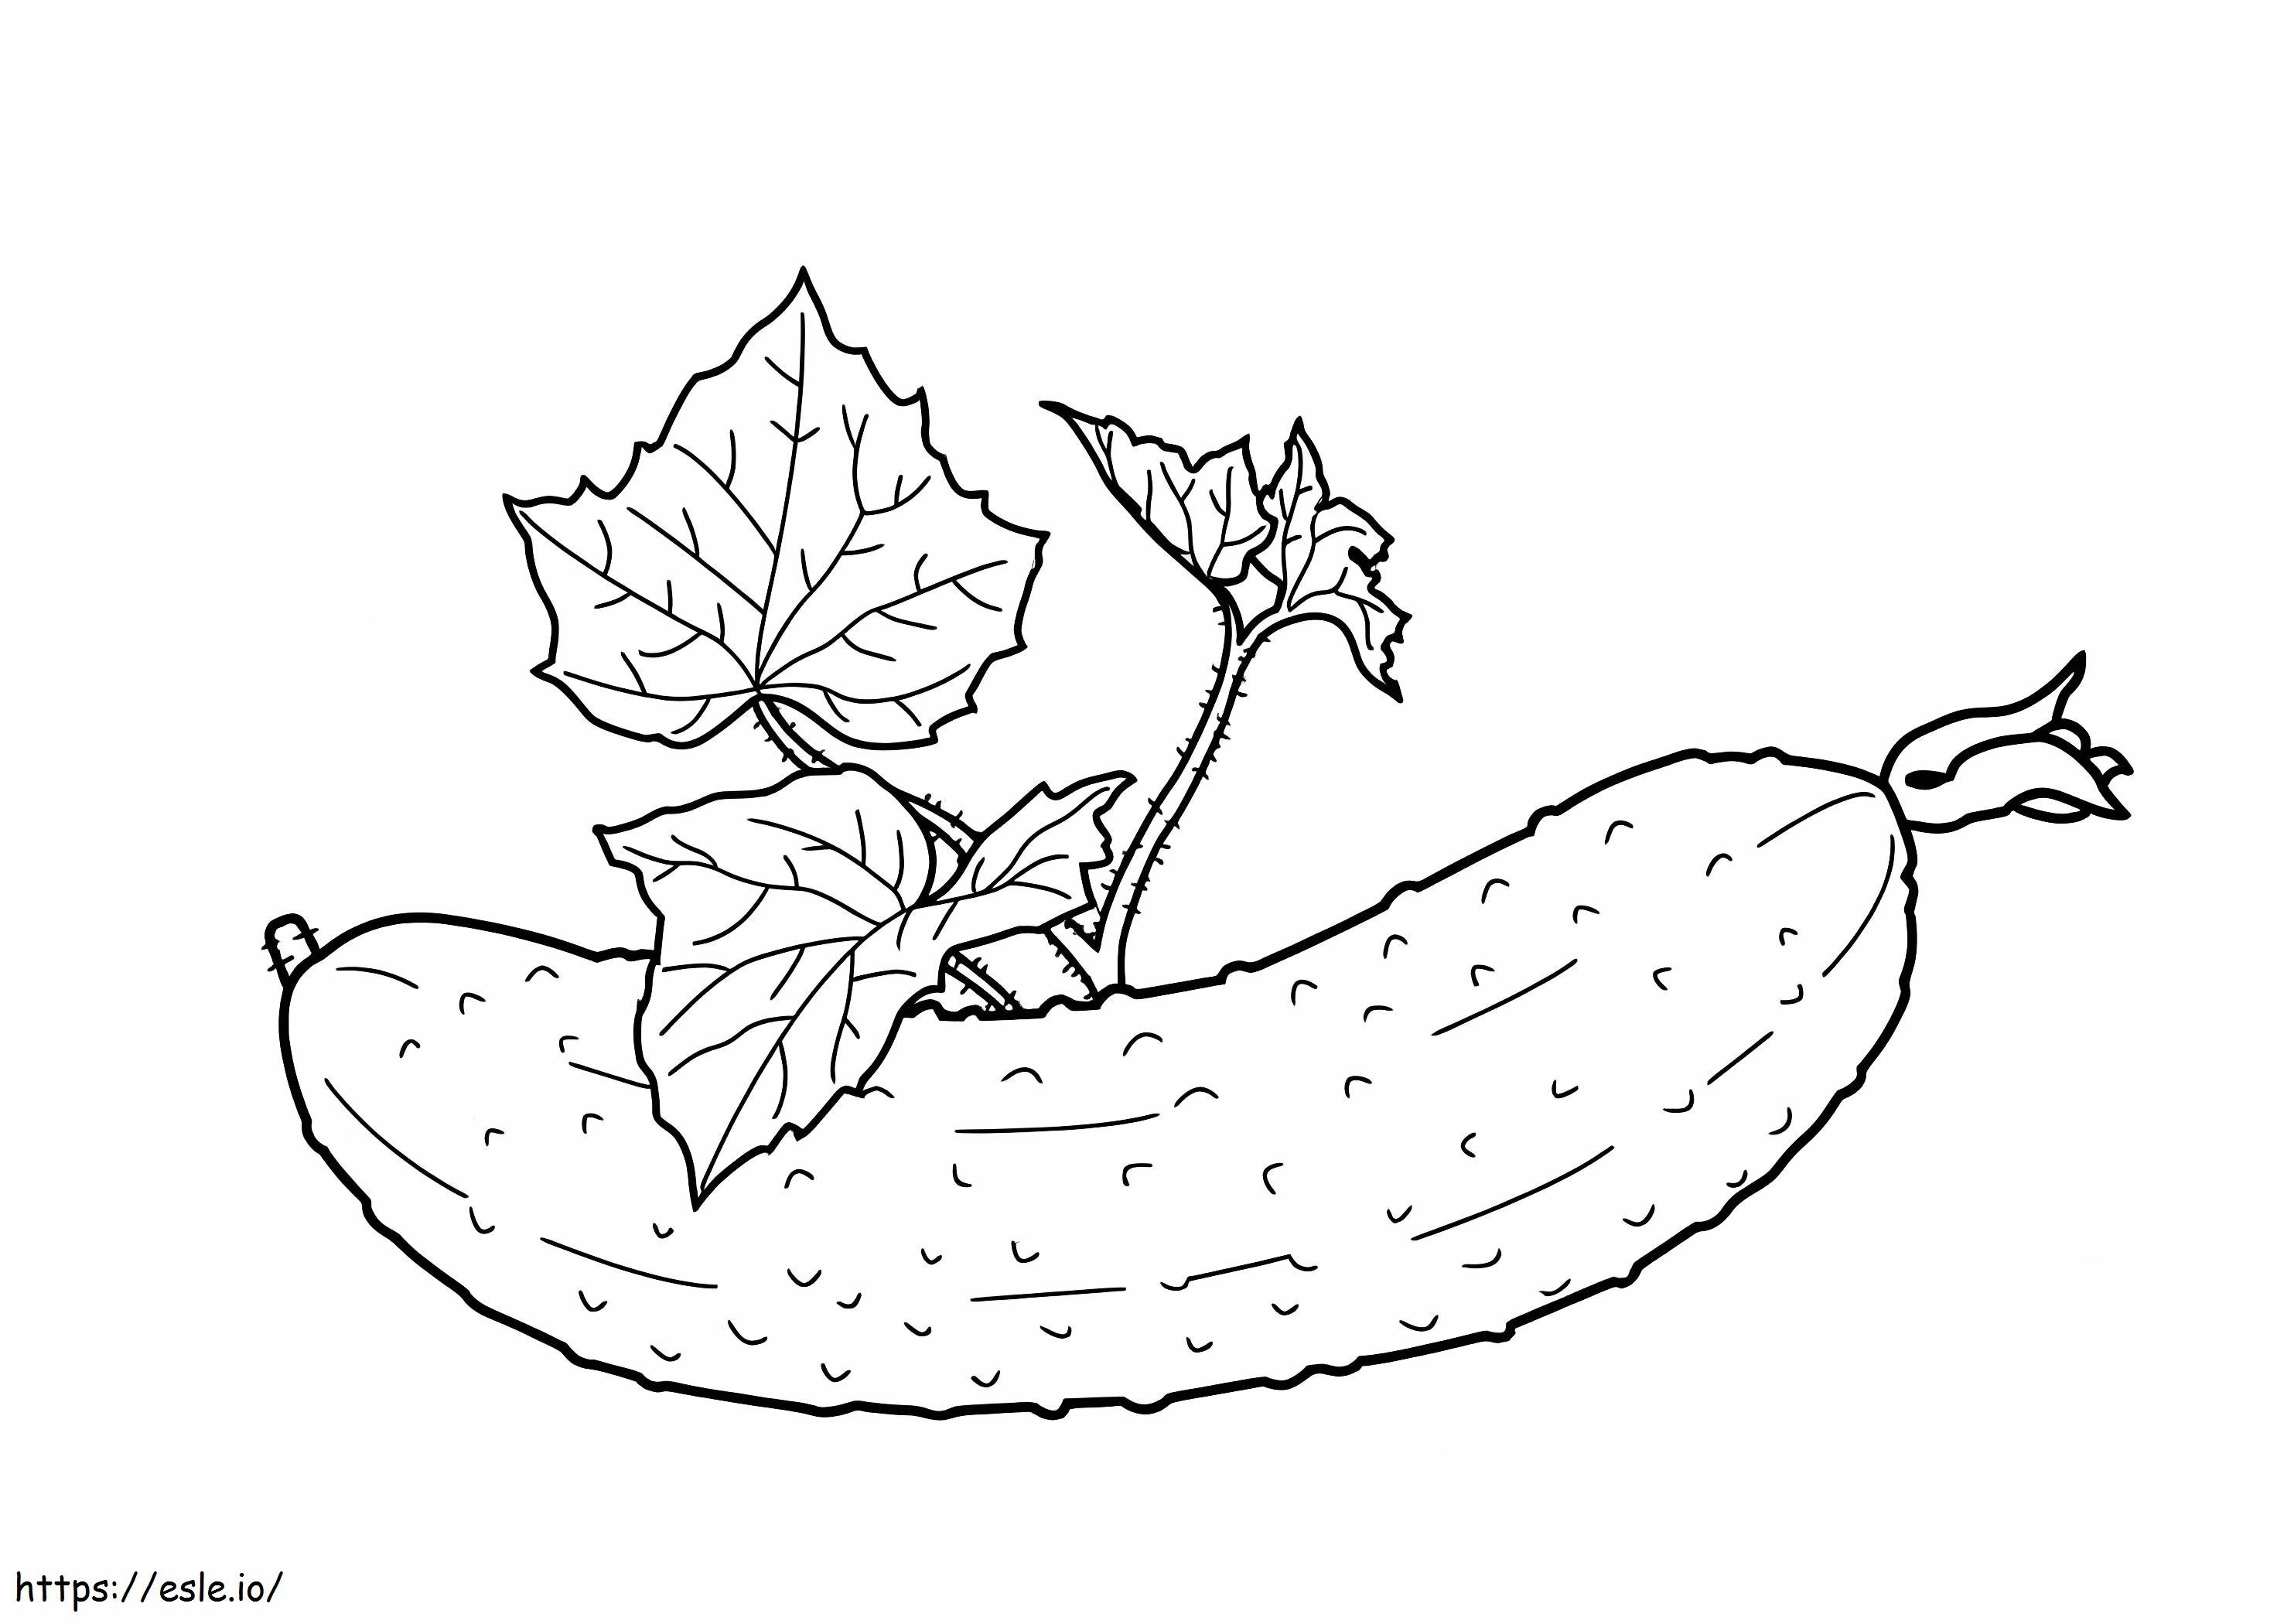 Good Cucumber coloring page